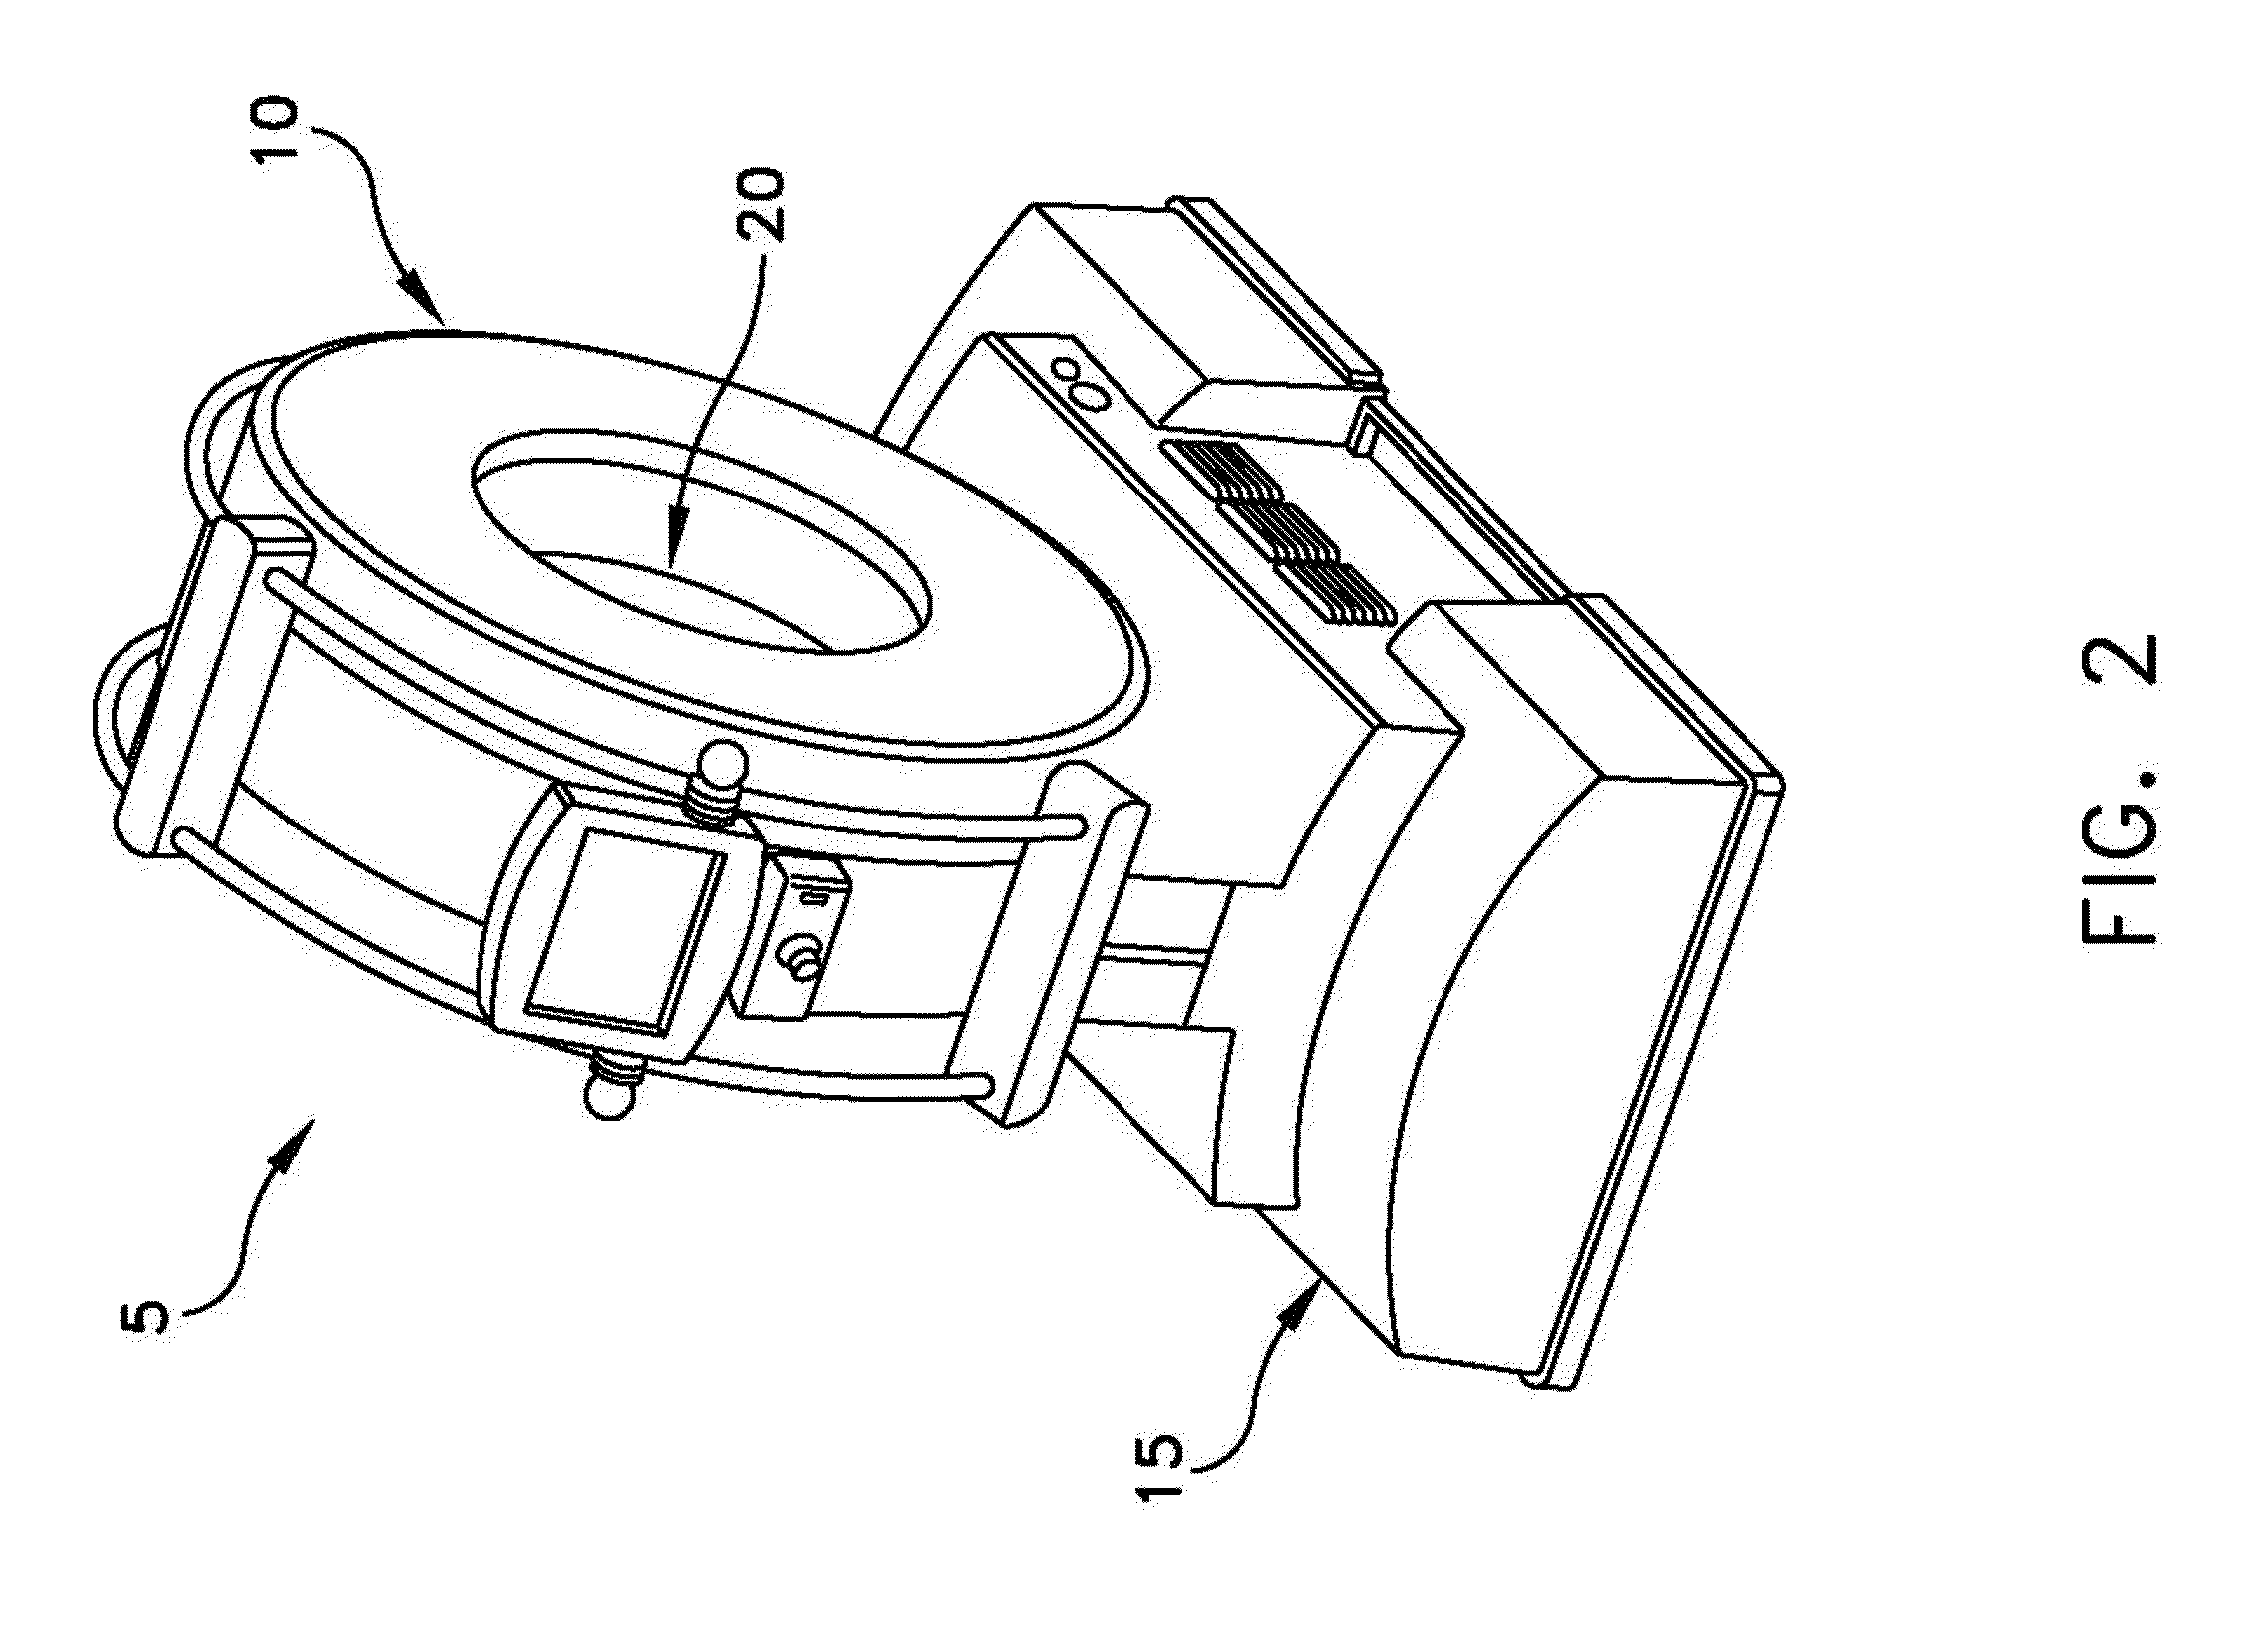 Imaging system with rigidly mounted fiducial markers